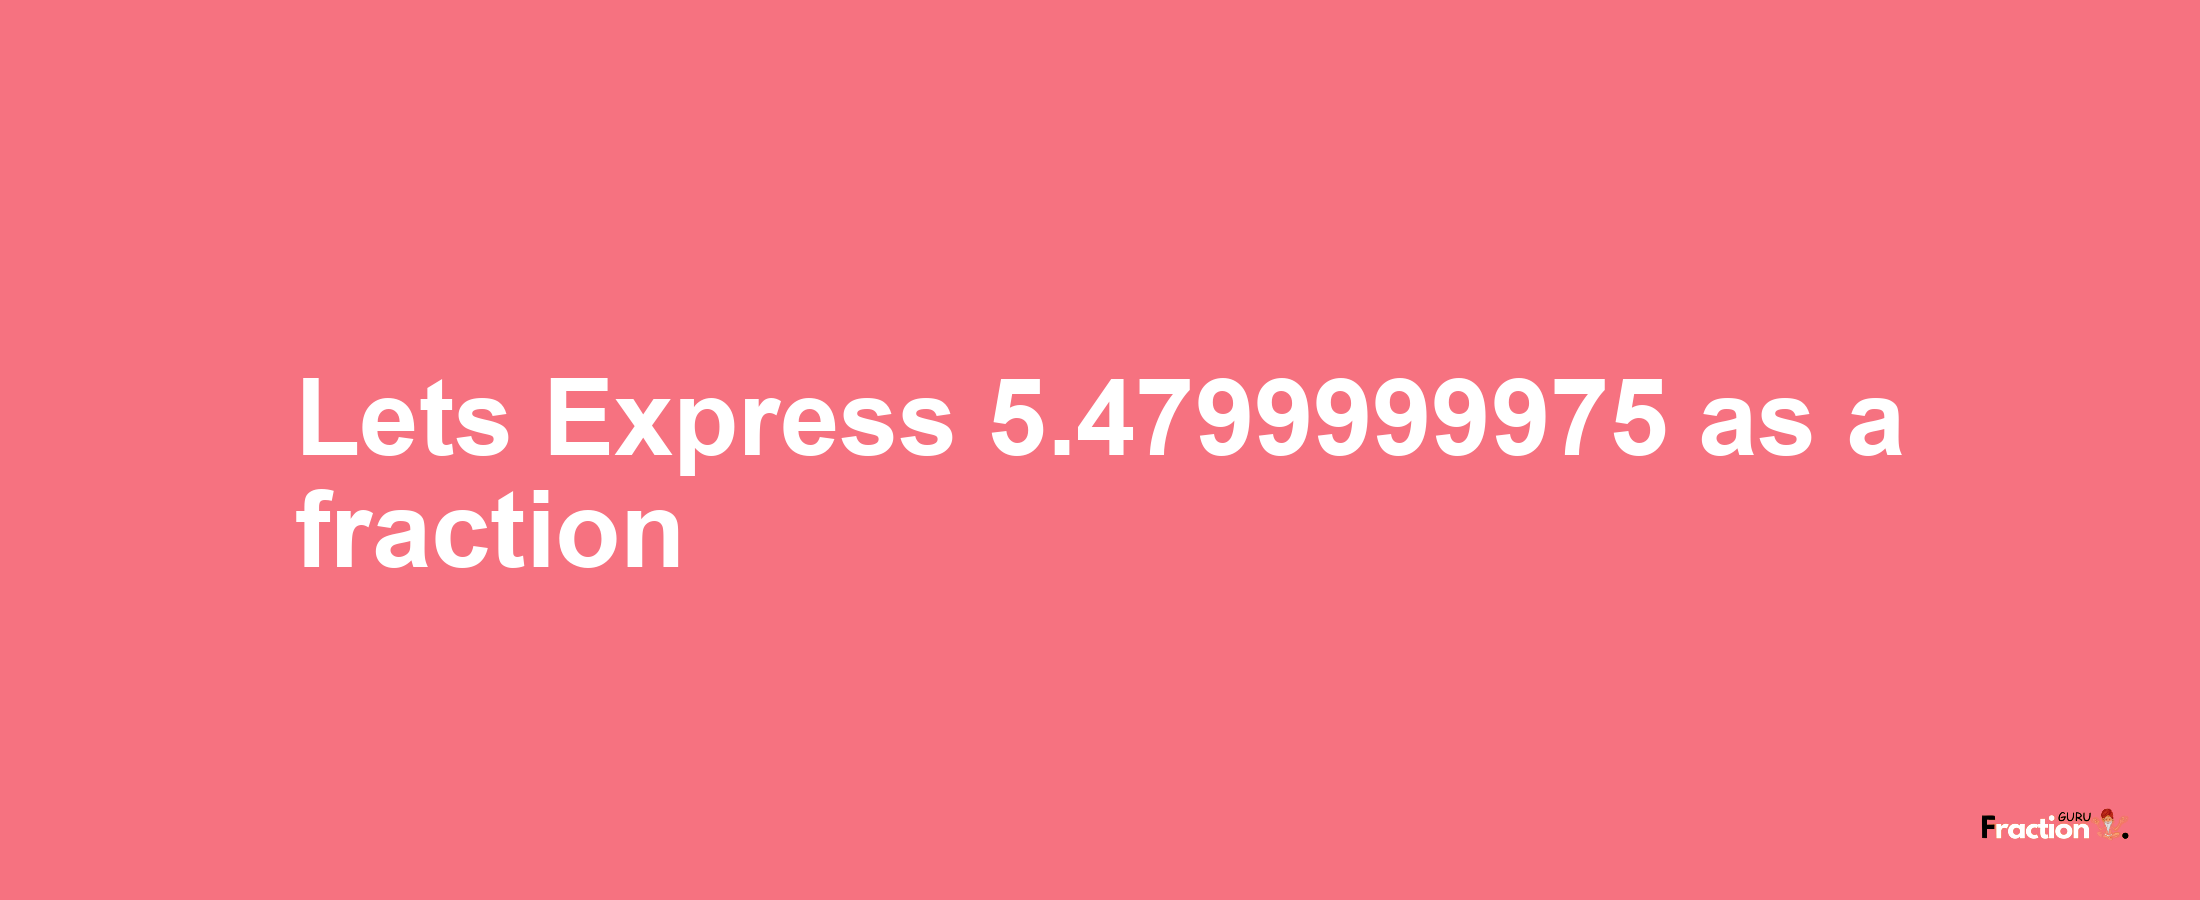 Lets Express 5.4799999975 as afraction